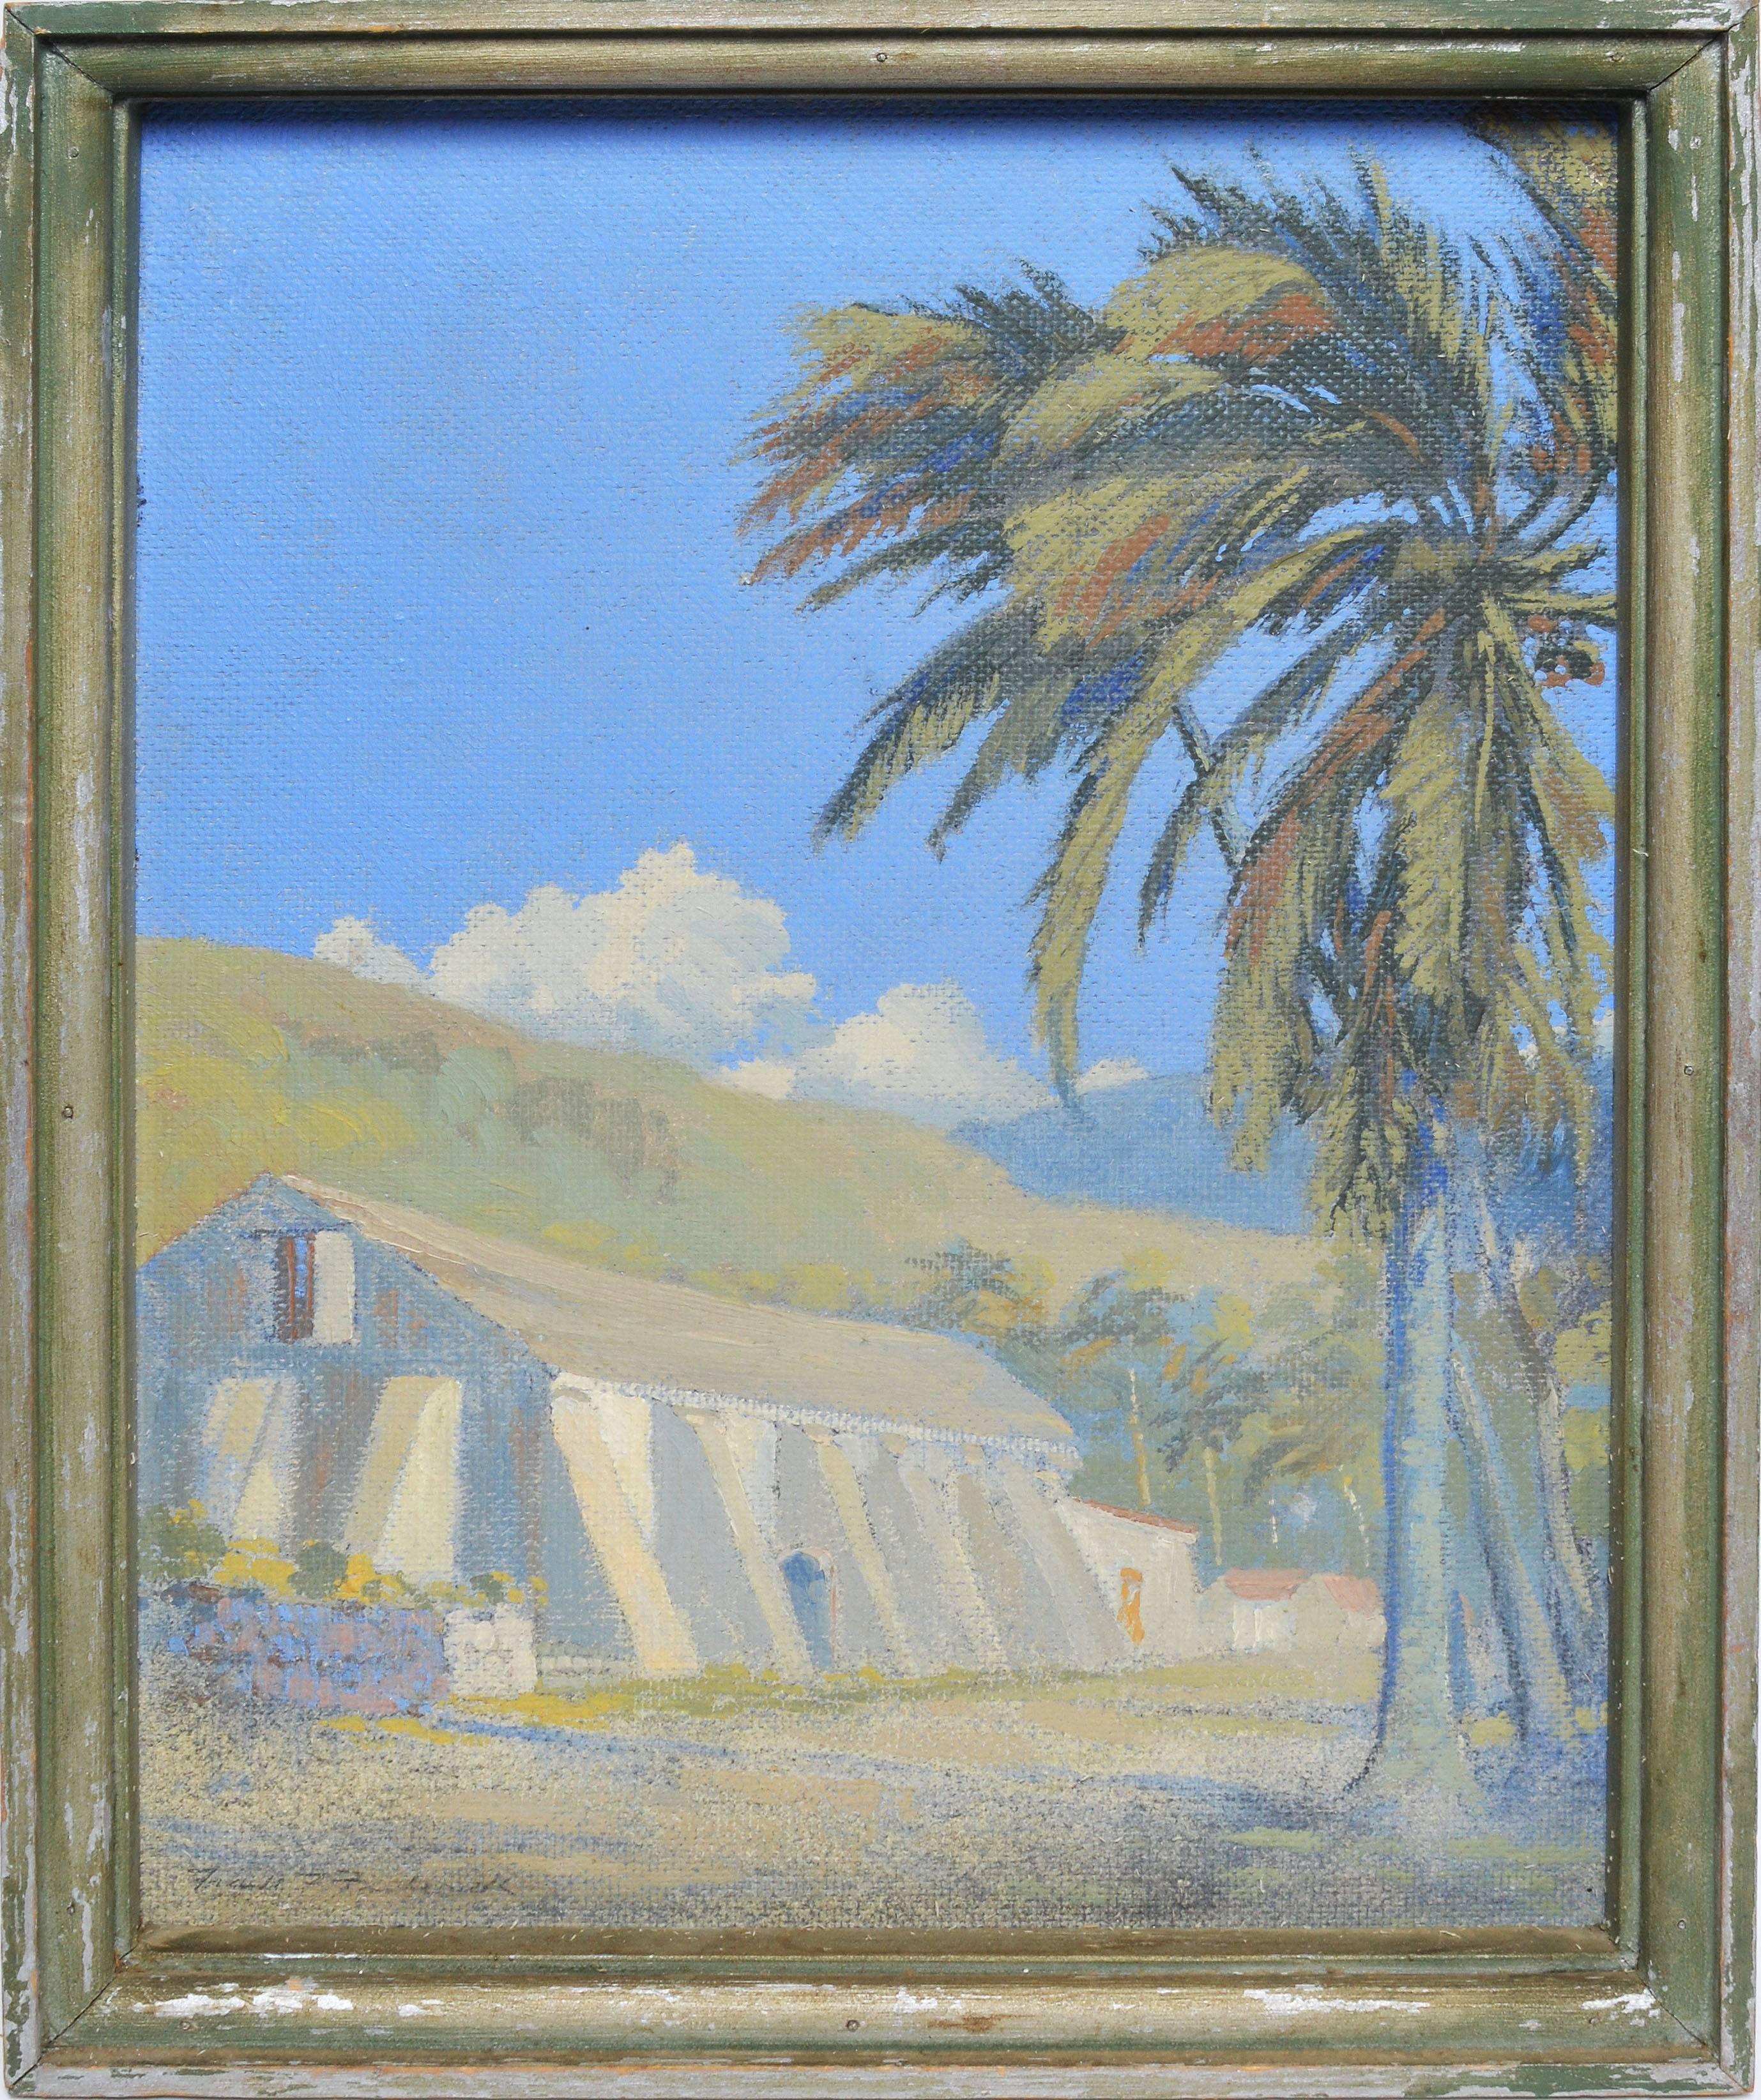 Impressionist landscape of a Sugar Warehouse in St. Thomas by Frank Frederick  (born 1866).  Oil on board, circa 1900.  Signed lower left, "Frank Frederick".  Displayed in a green wood frame.  Image size, 11.75"L x 16"H, overall 13"L x 17"H.